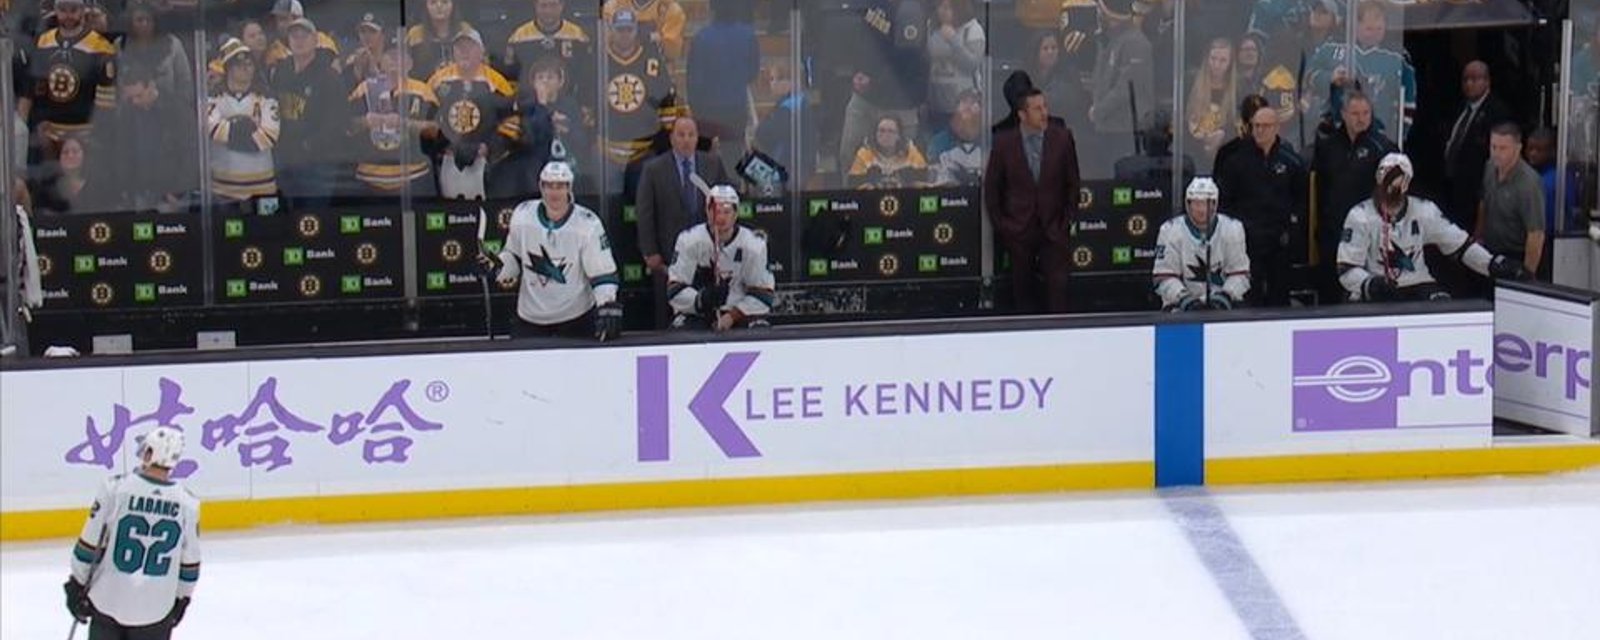 Coach DeBoer and 6 players get ejected from Bruins-Sharks game! 